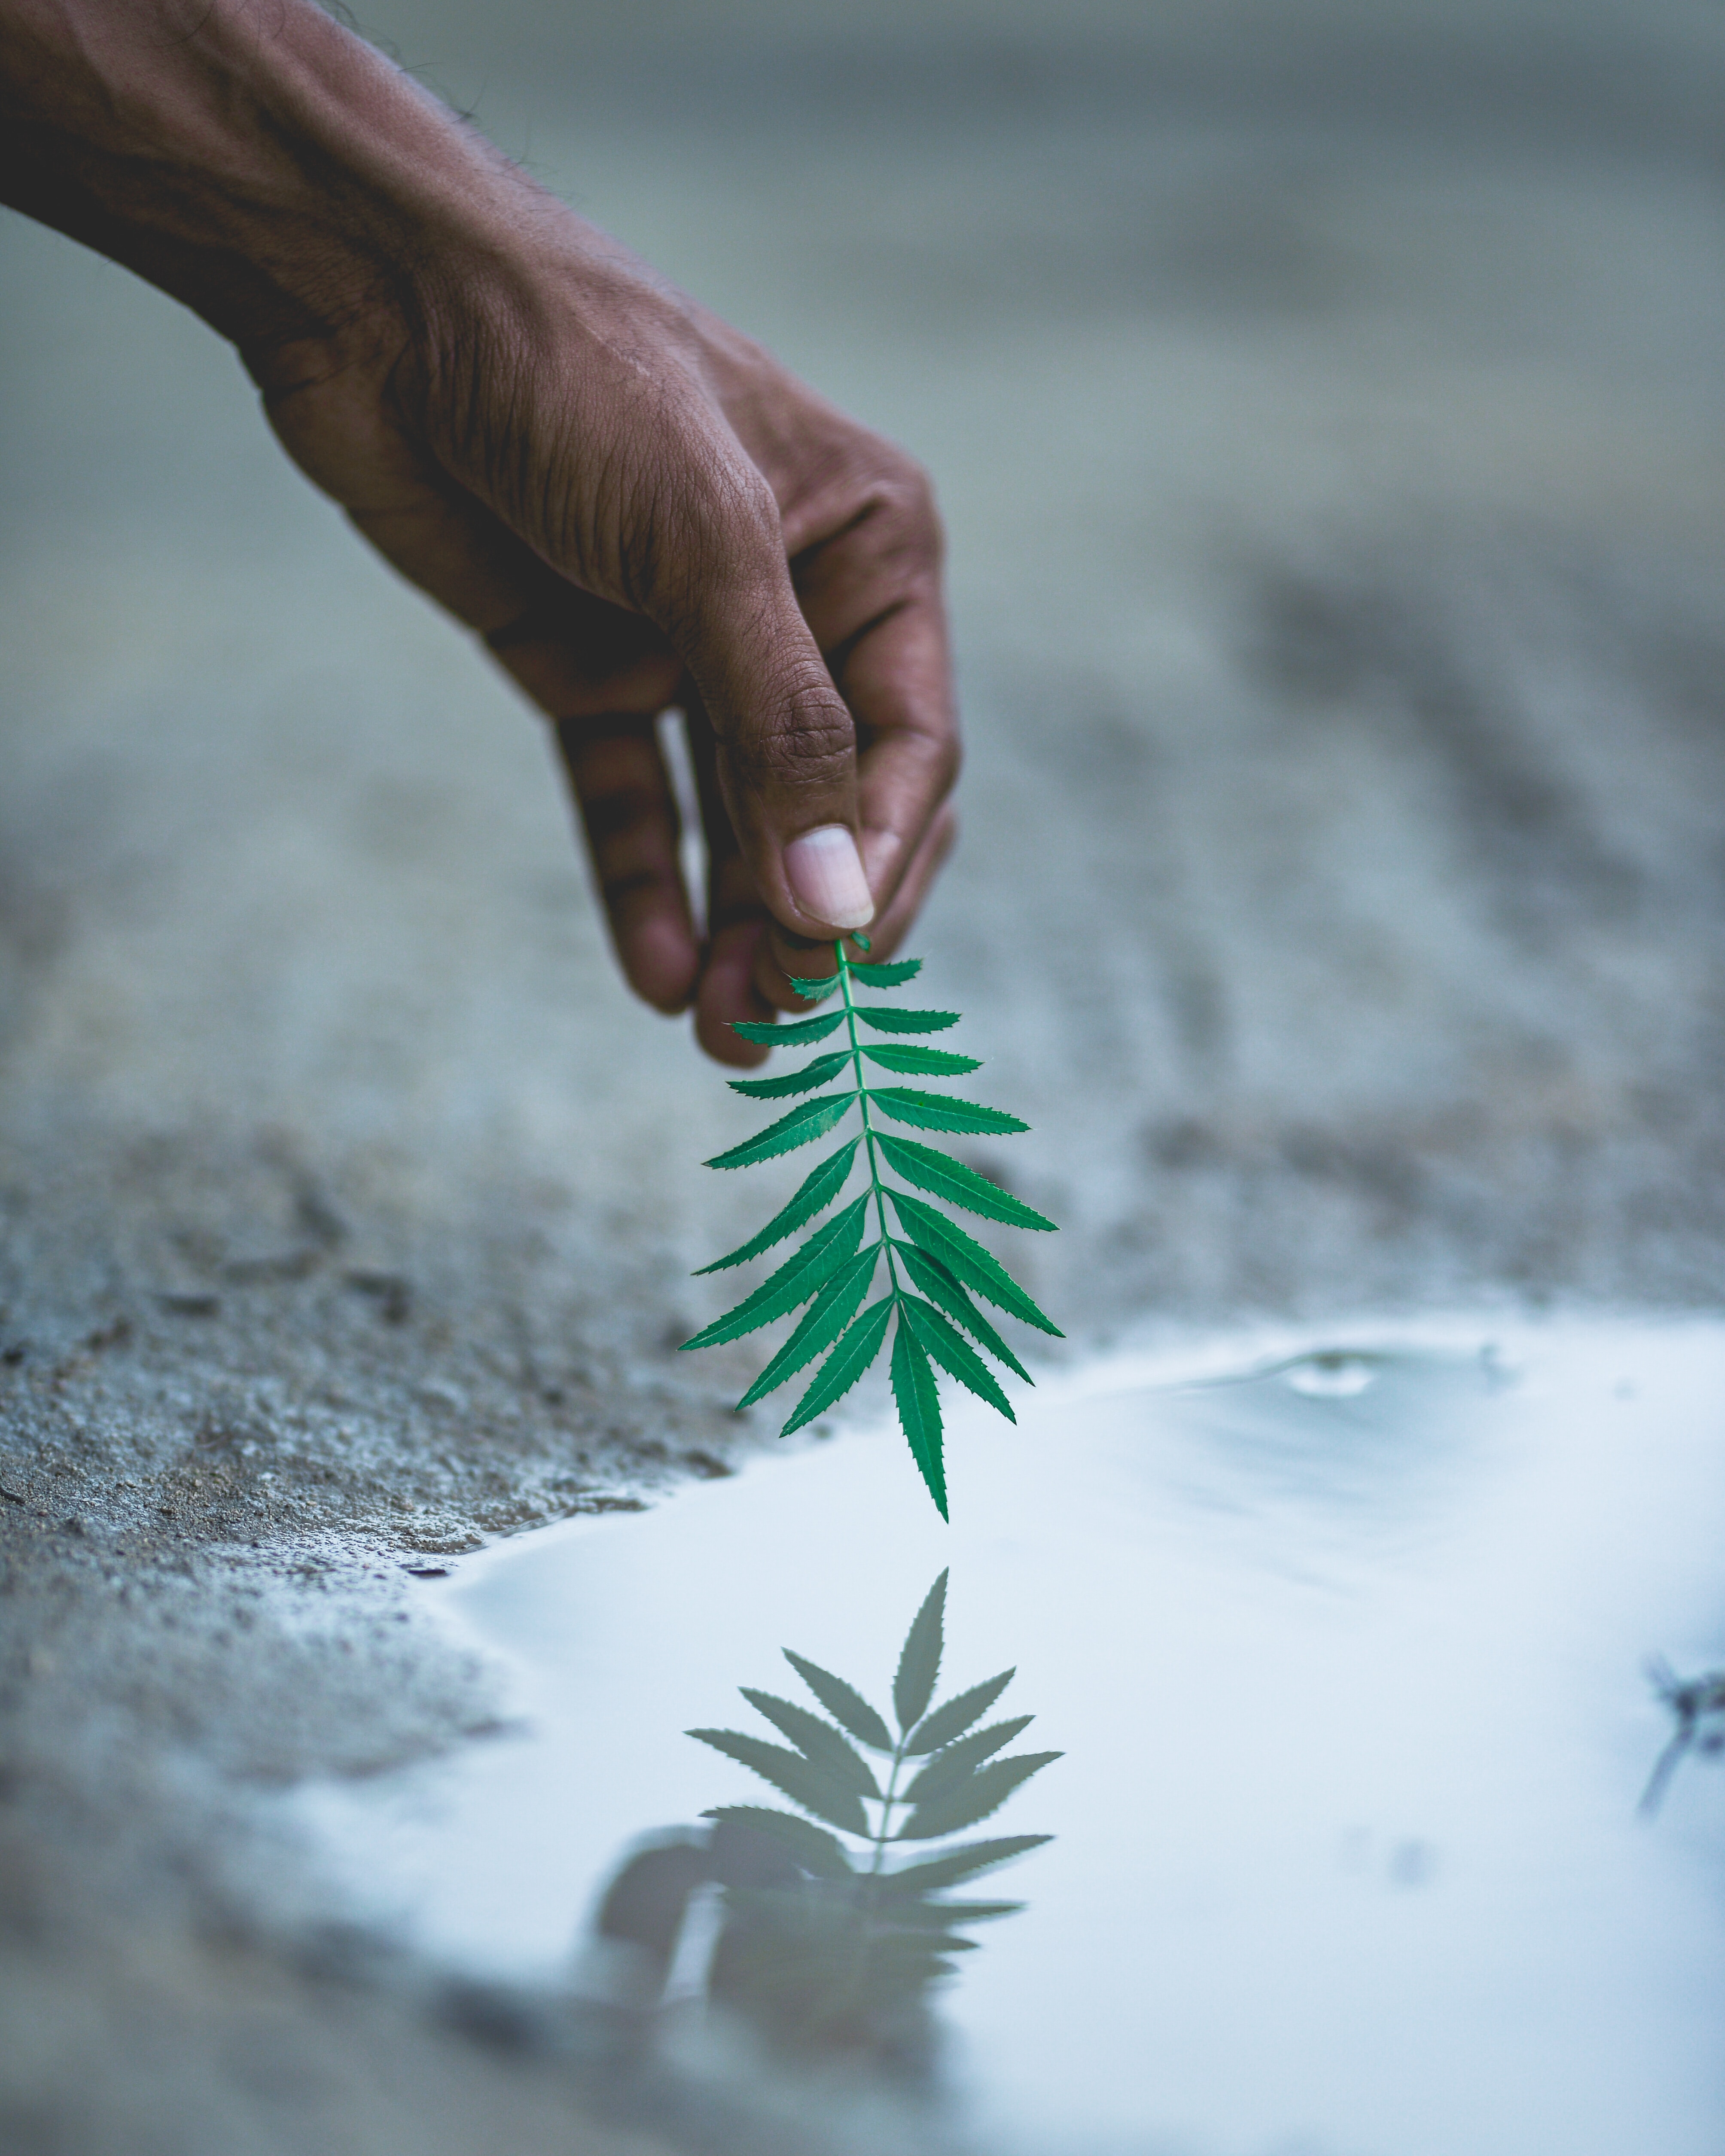 a photo of a dark skinned hand holding a green leaf above a puddle of water on the sidewalk